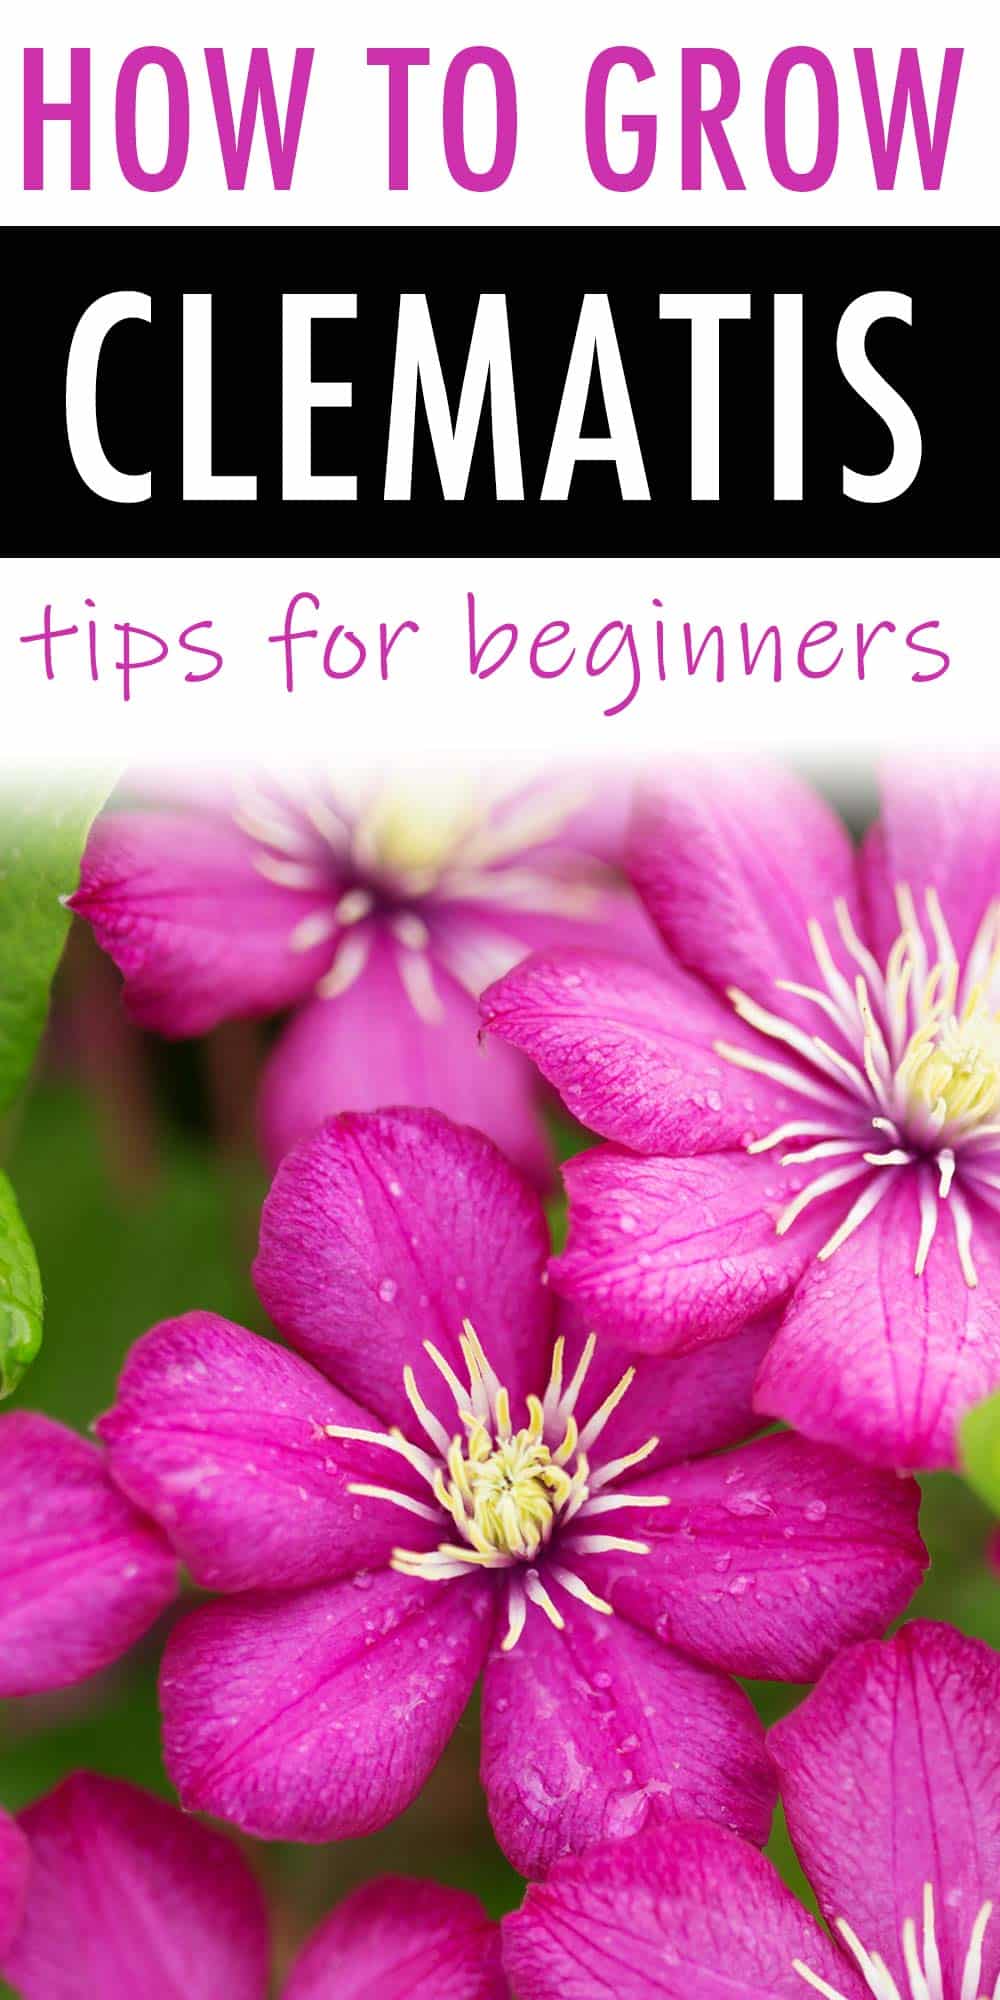 How to Grow Clematis